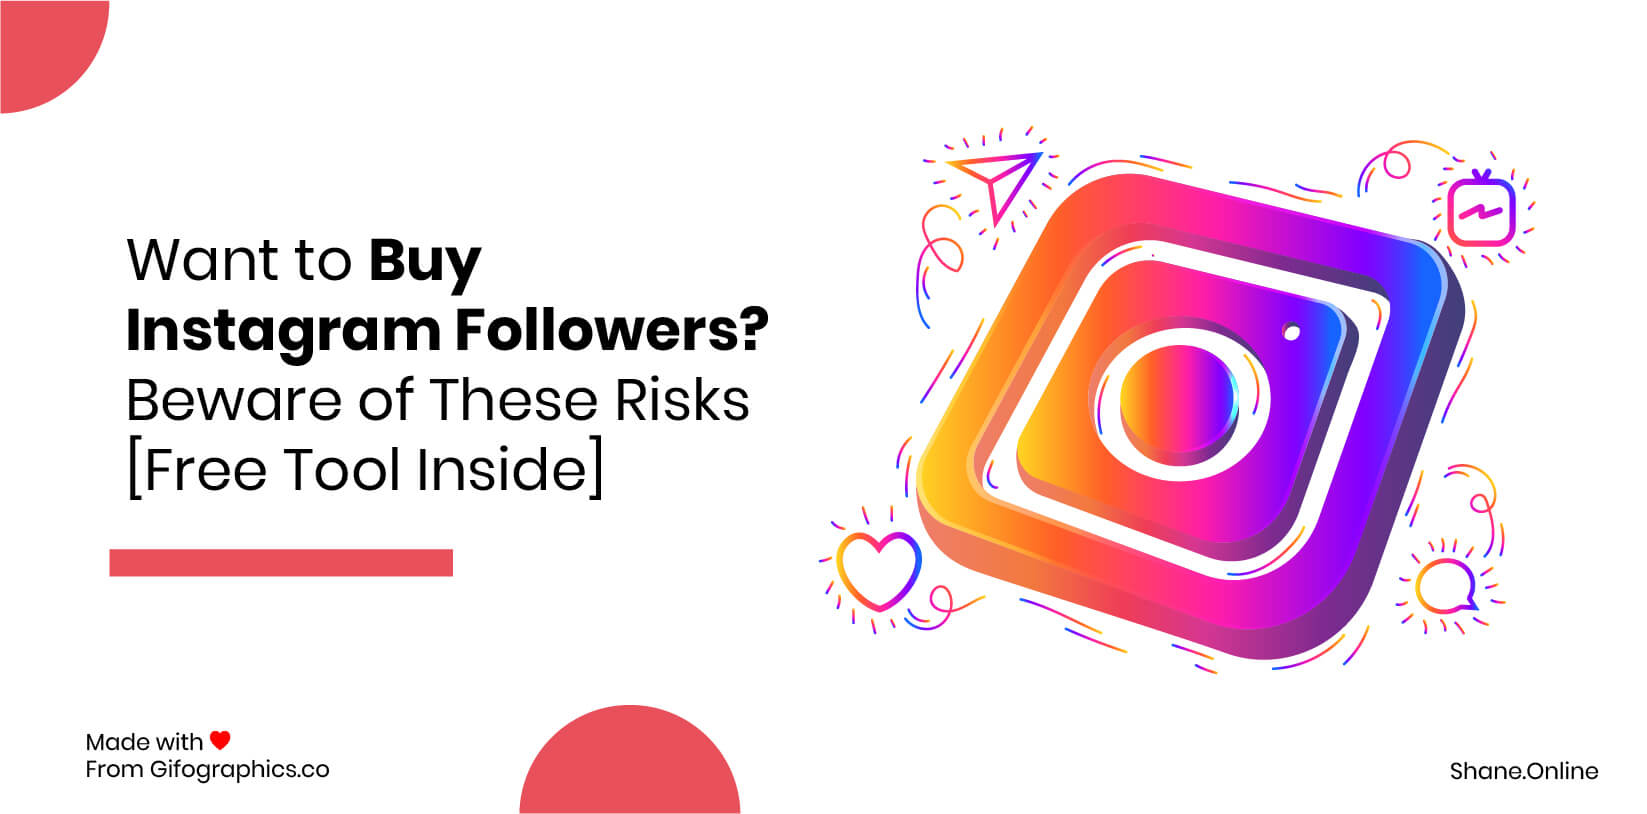 Want to Buy Instagram Followers- Beware of These Risks [Free Tool Inside]